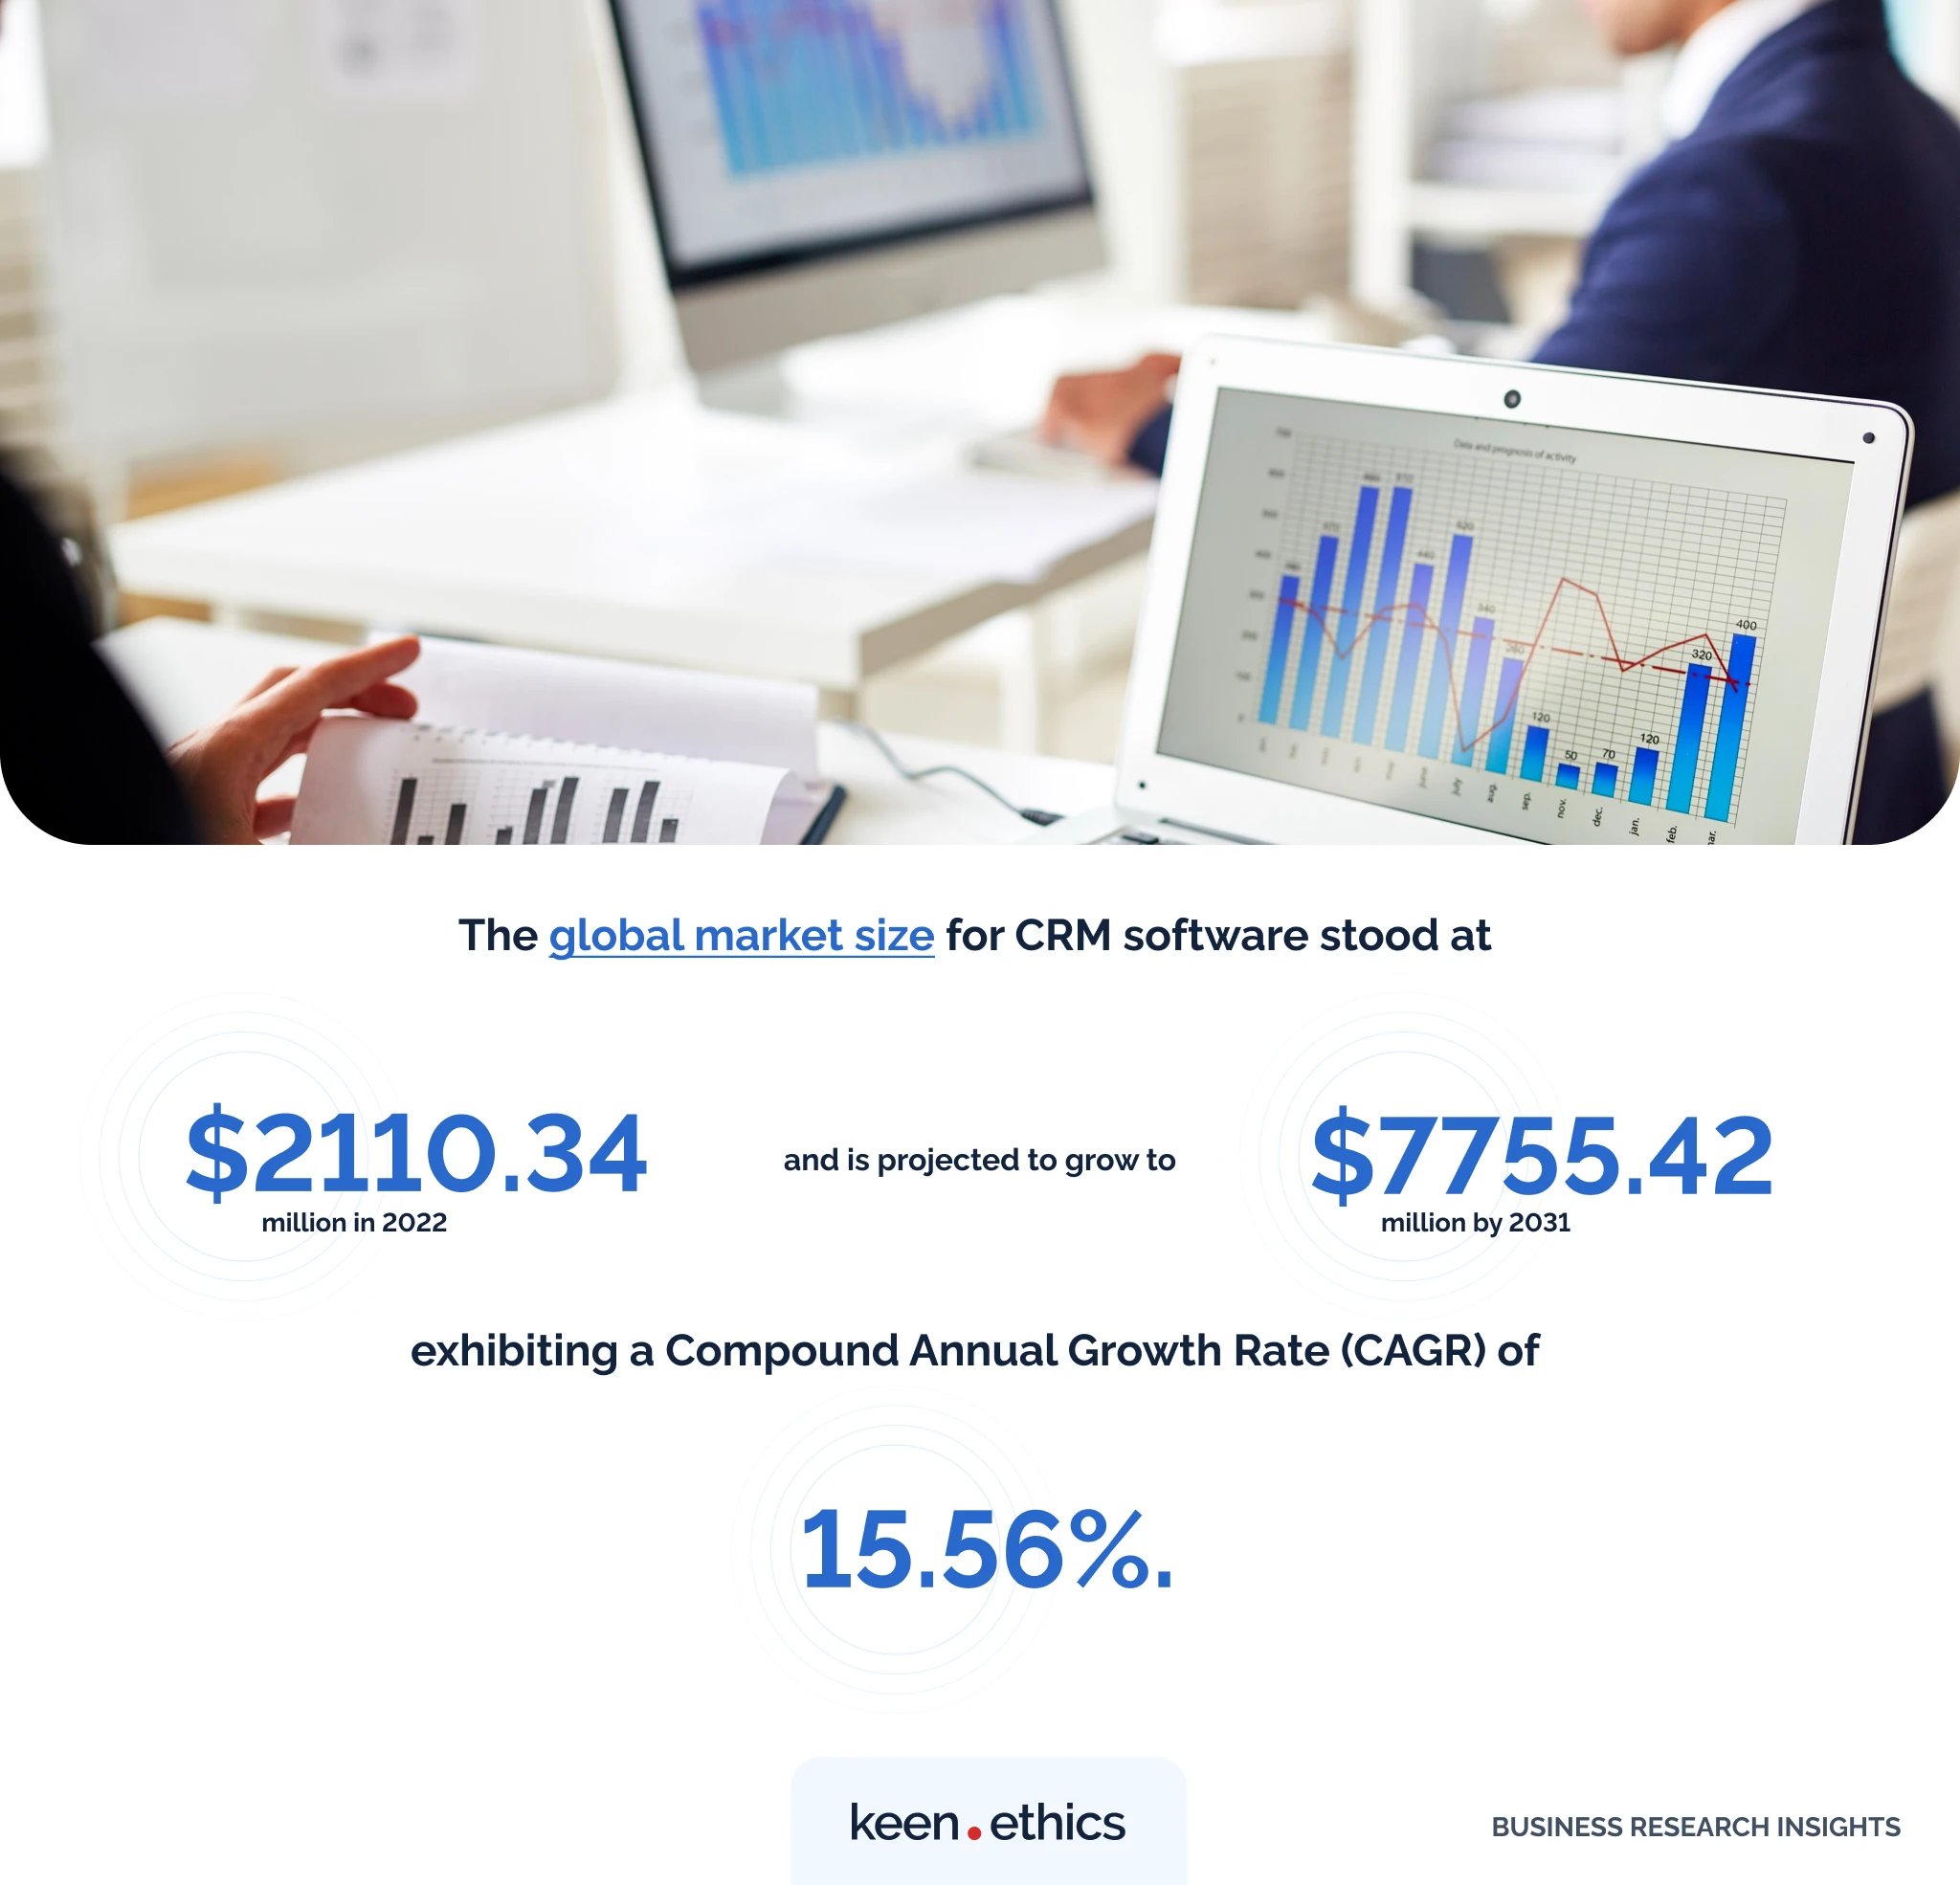 Statistics on the global market of CRM